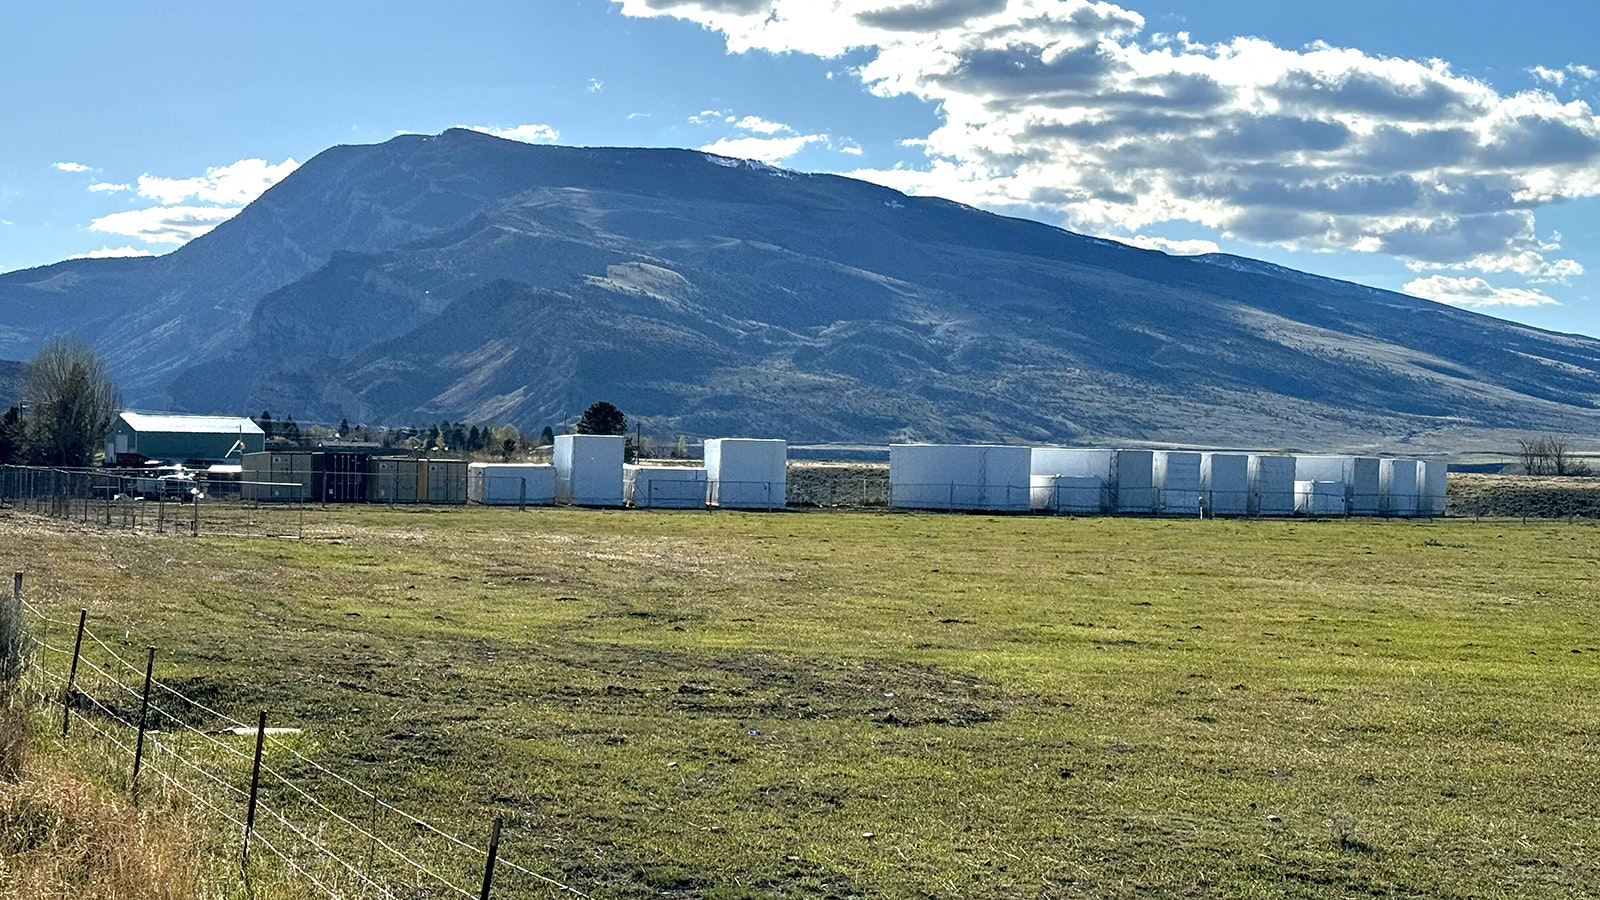 An array of large shipping containers holding materials to build a proposed Church of Jesus Christ of Latter-day Saints temple in Cody are staged at the site.